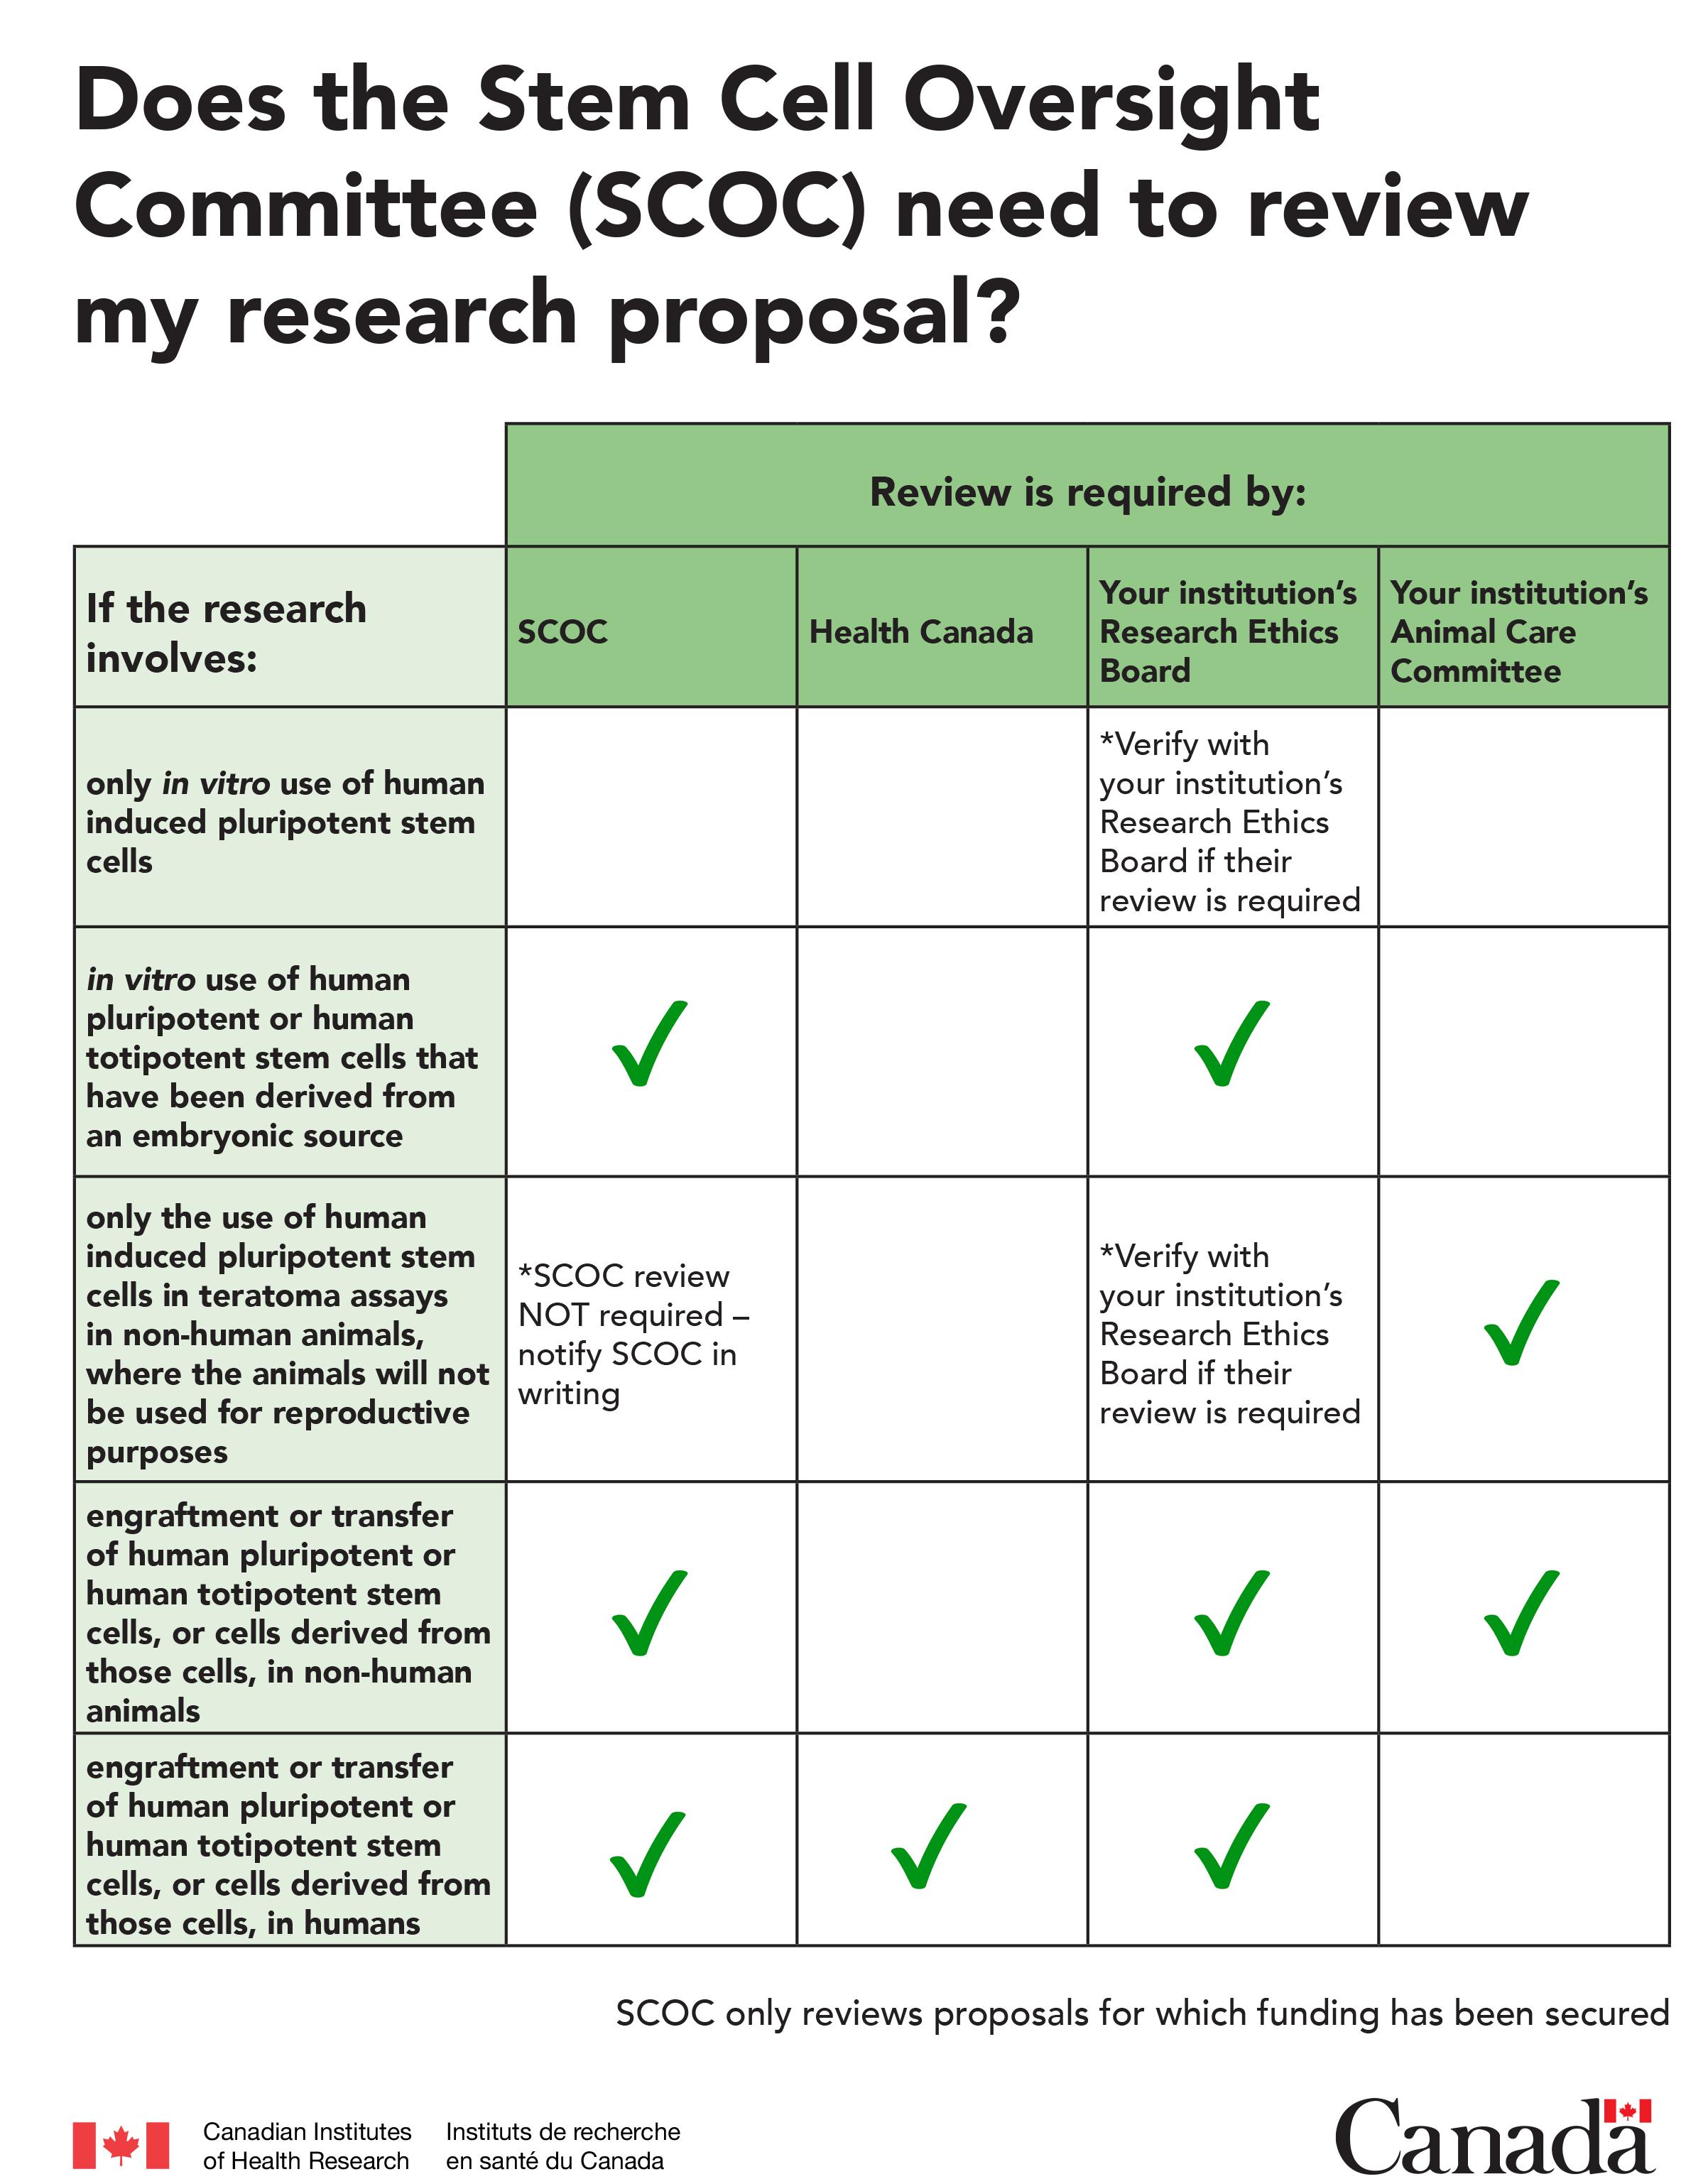 Does the Stem Cell Oversight Committee (SCOC) need to review my research proposal?